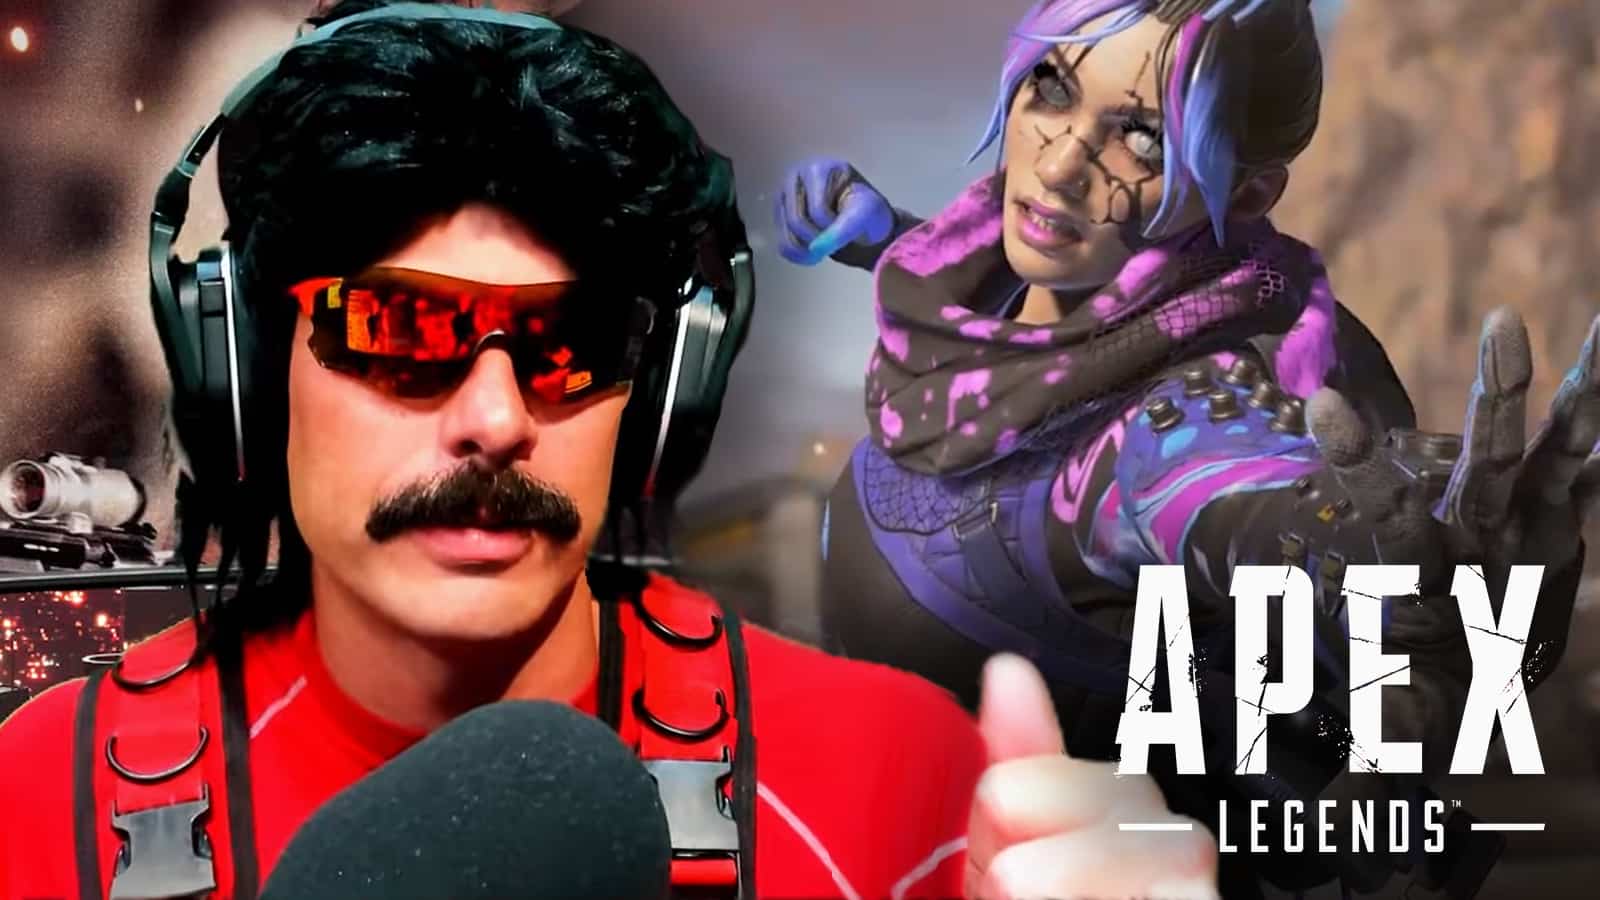 Dr Disrespect thumbs up next to Apex Legends Wraith character after YouTube rage outburst.